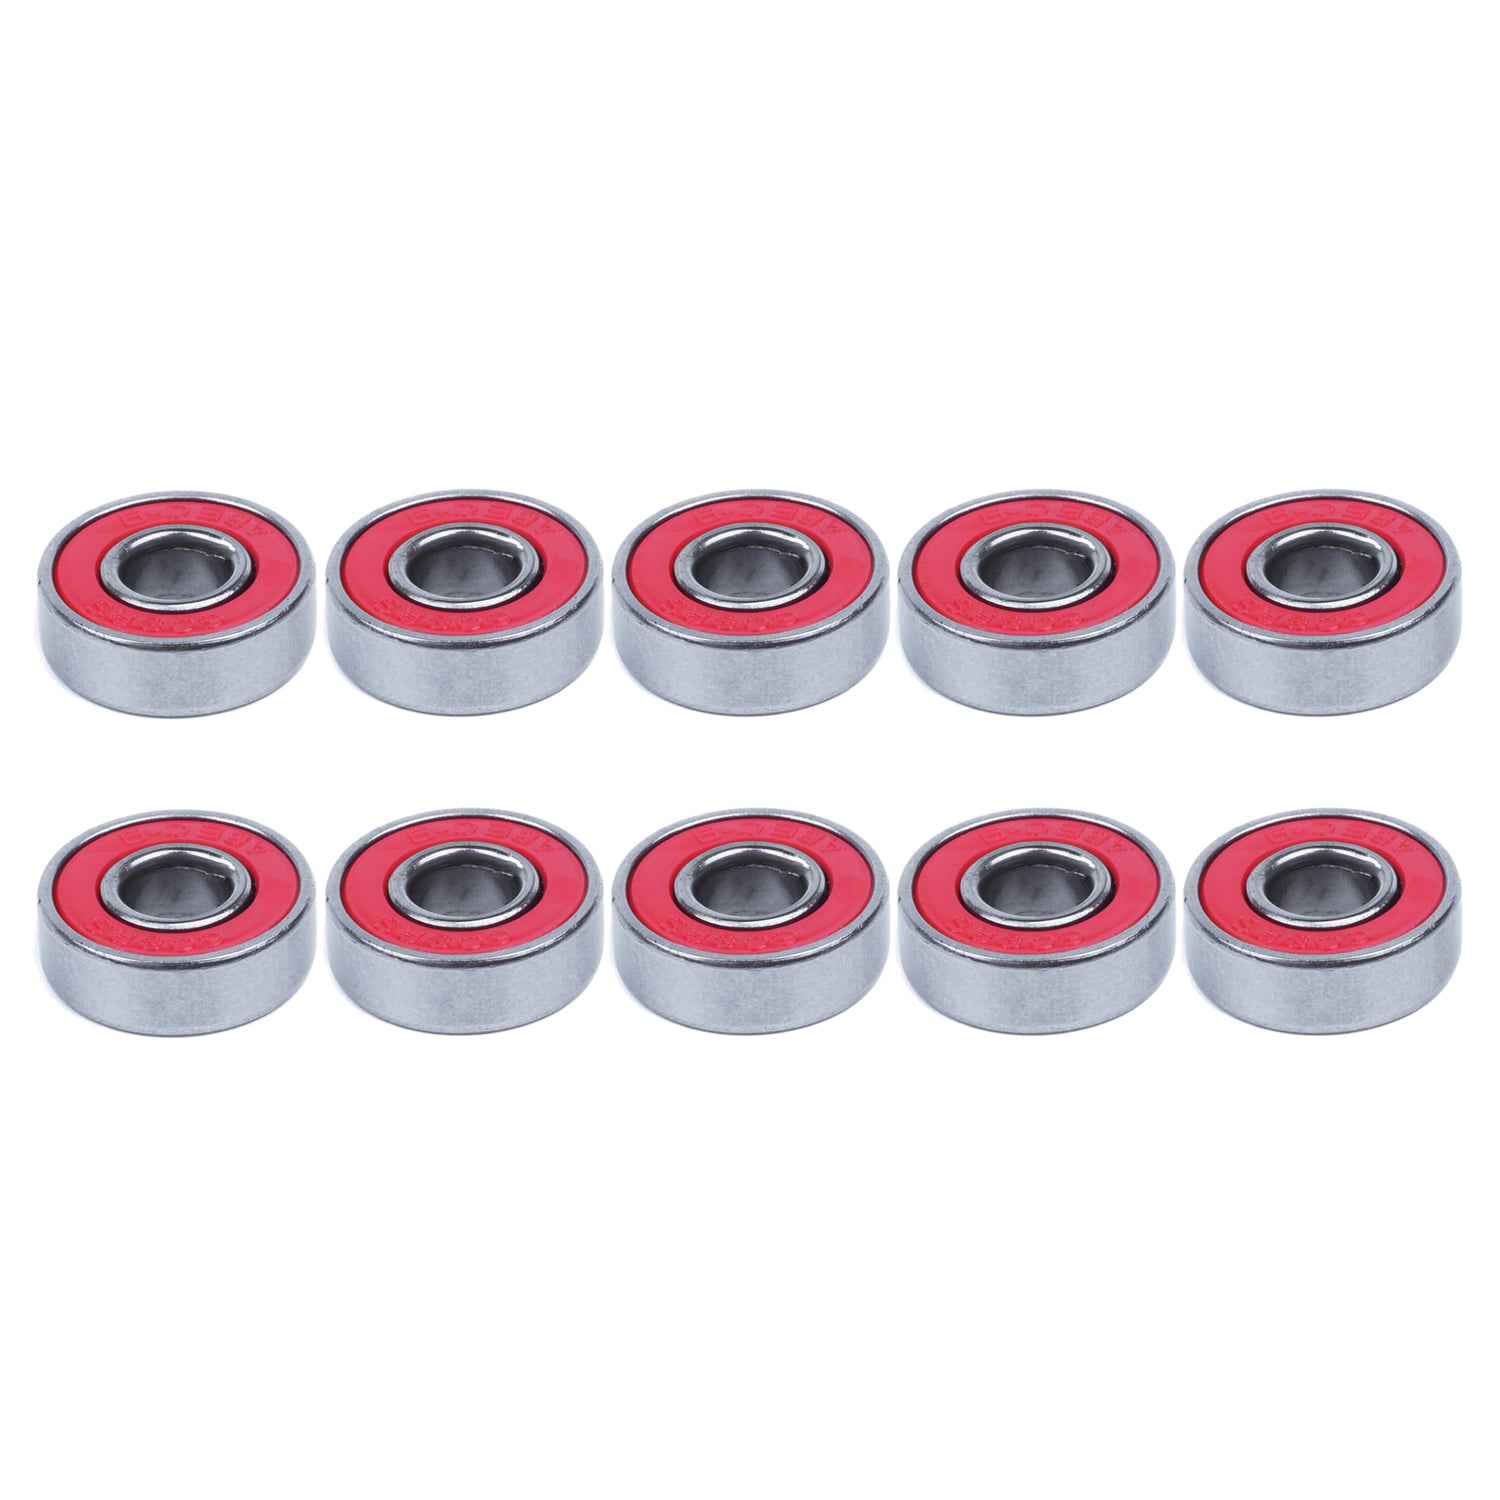 10pcs Carbon Steel 608zz Deep Groove Bearing For Skateboard Scooter 